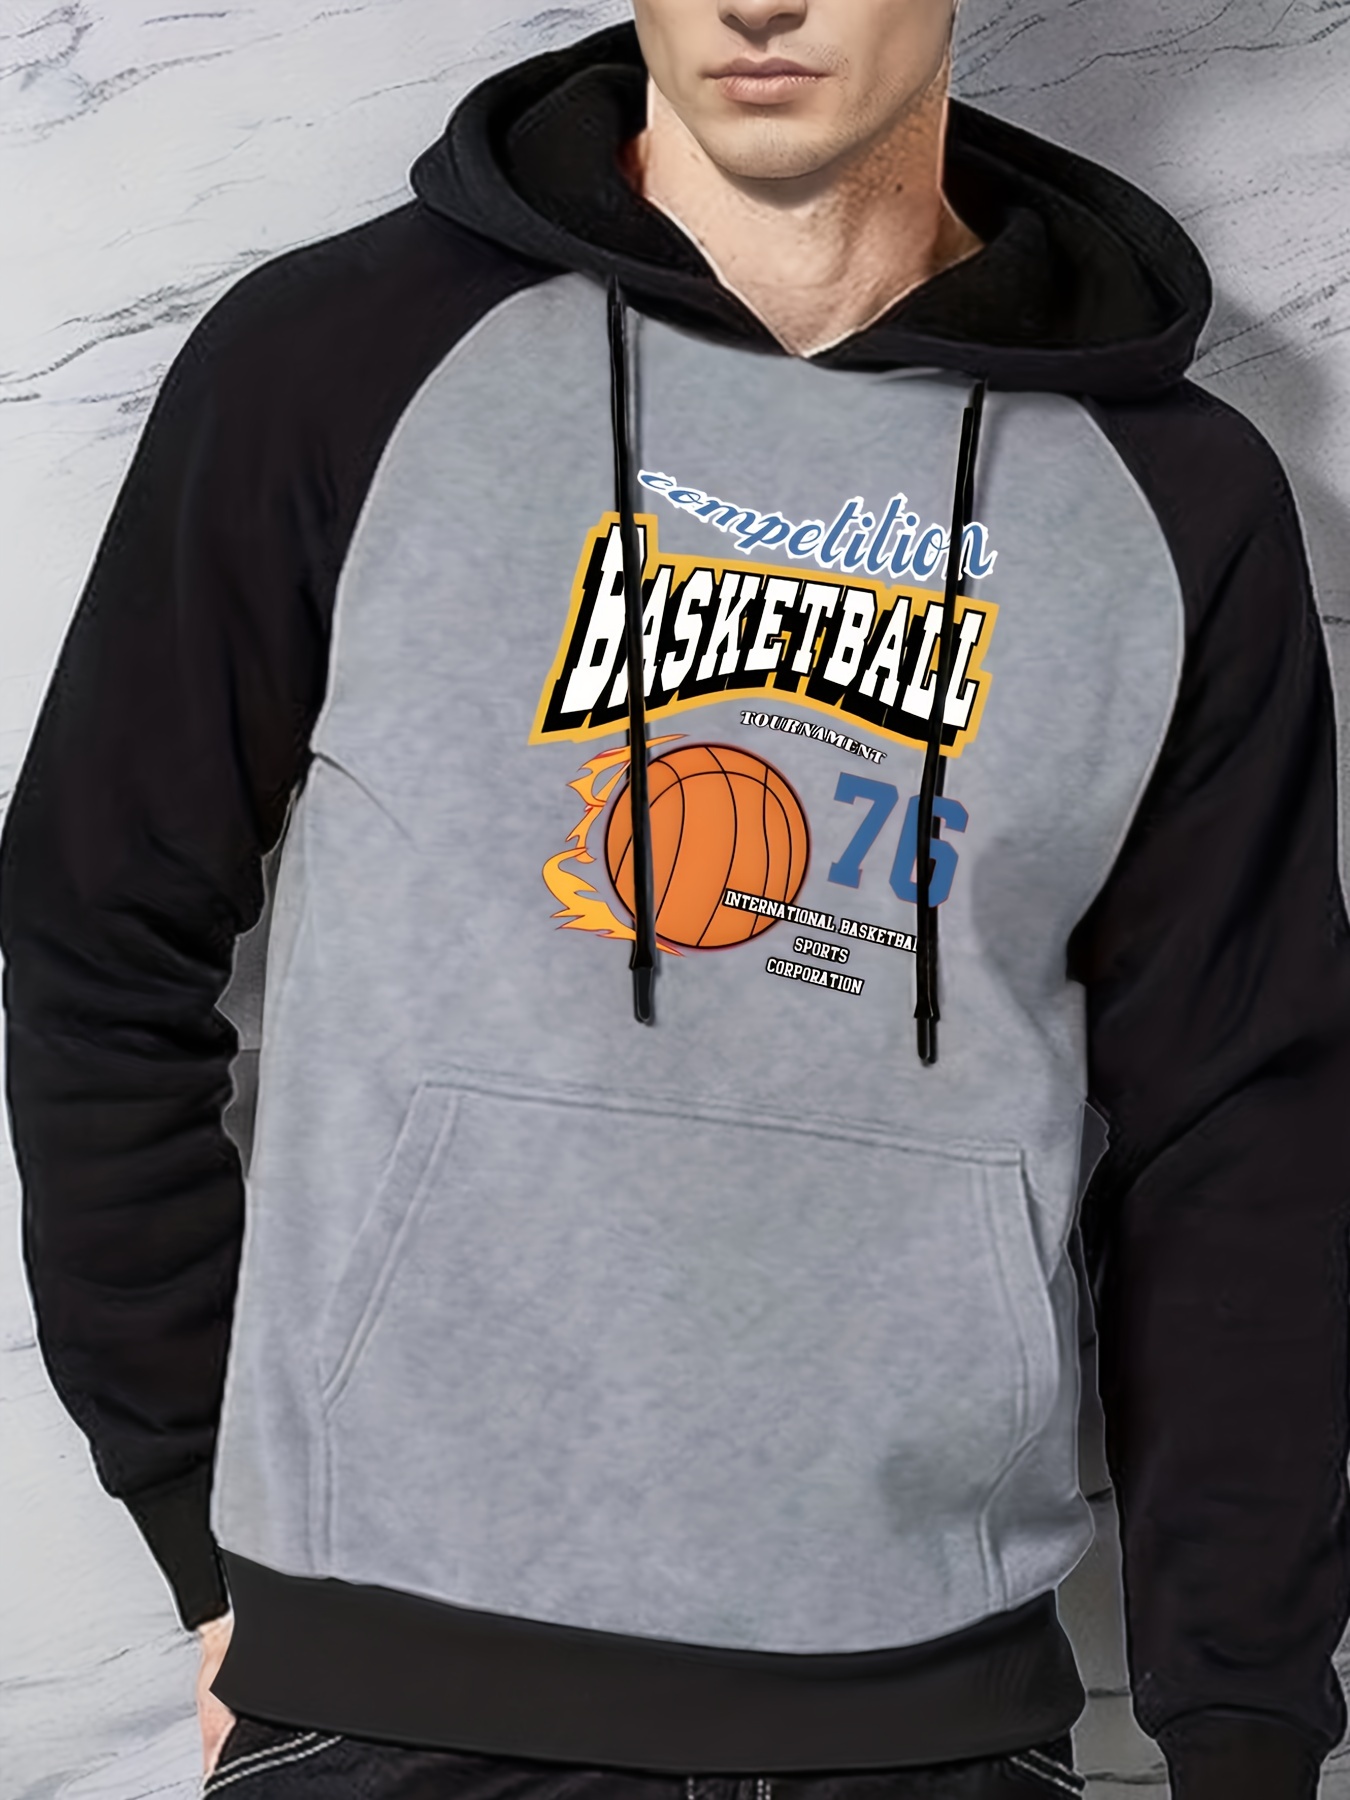 Basketball Print, Men's Outfits, Casual Hoodies Long Sleeve